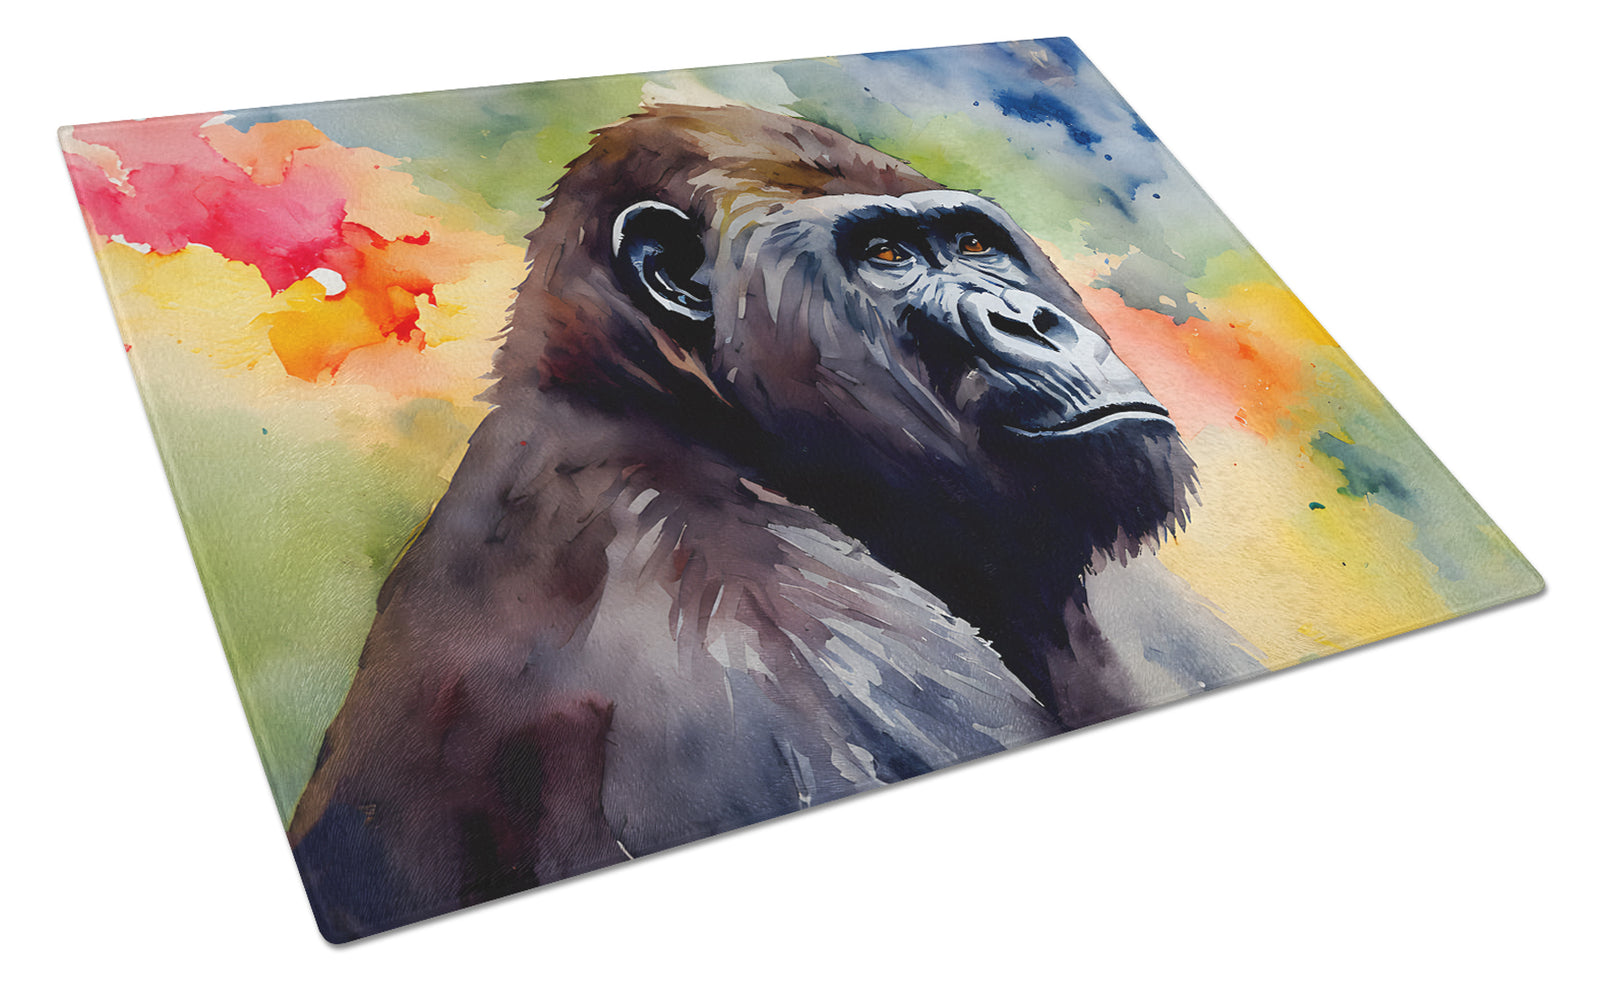 Buy this Gorilla Glass Cutting Board Large